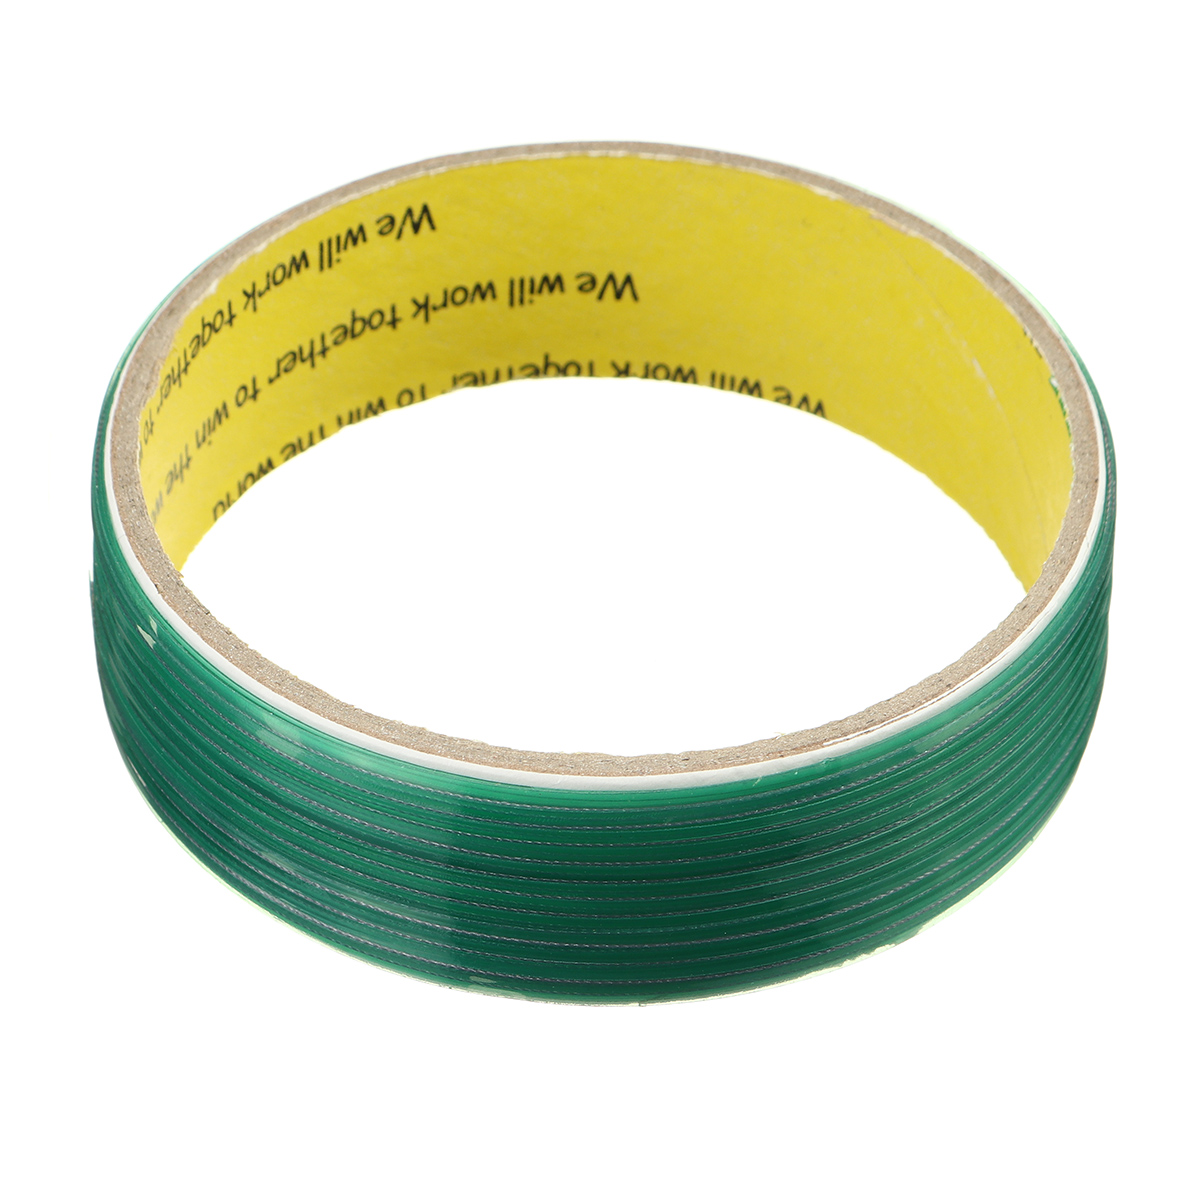 5101550m-Finish-Line-Tape-Wrapping-Vinyl-Films-Decals-Rolls-Wrap-Tape-1701004-5